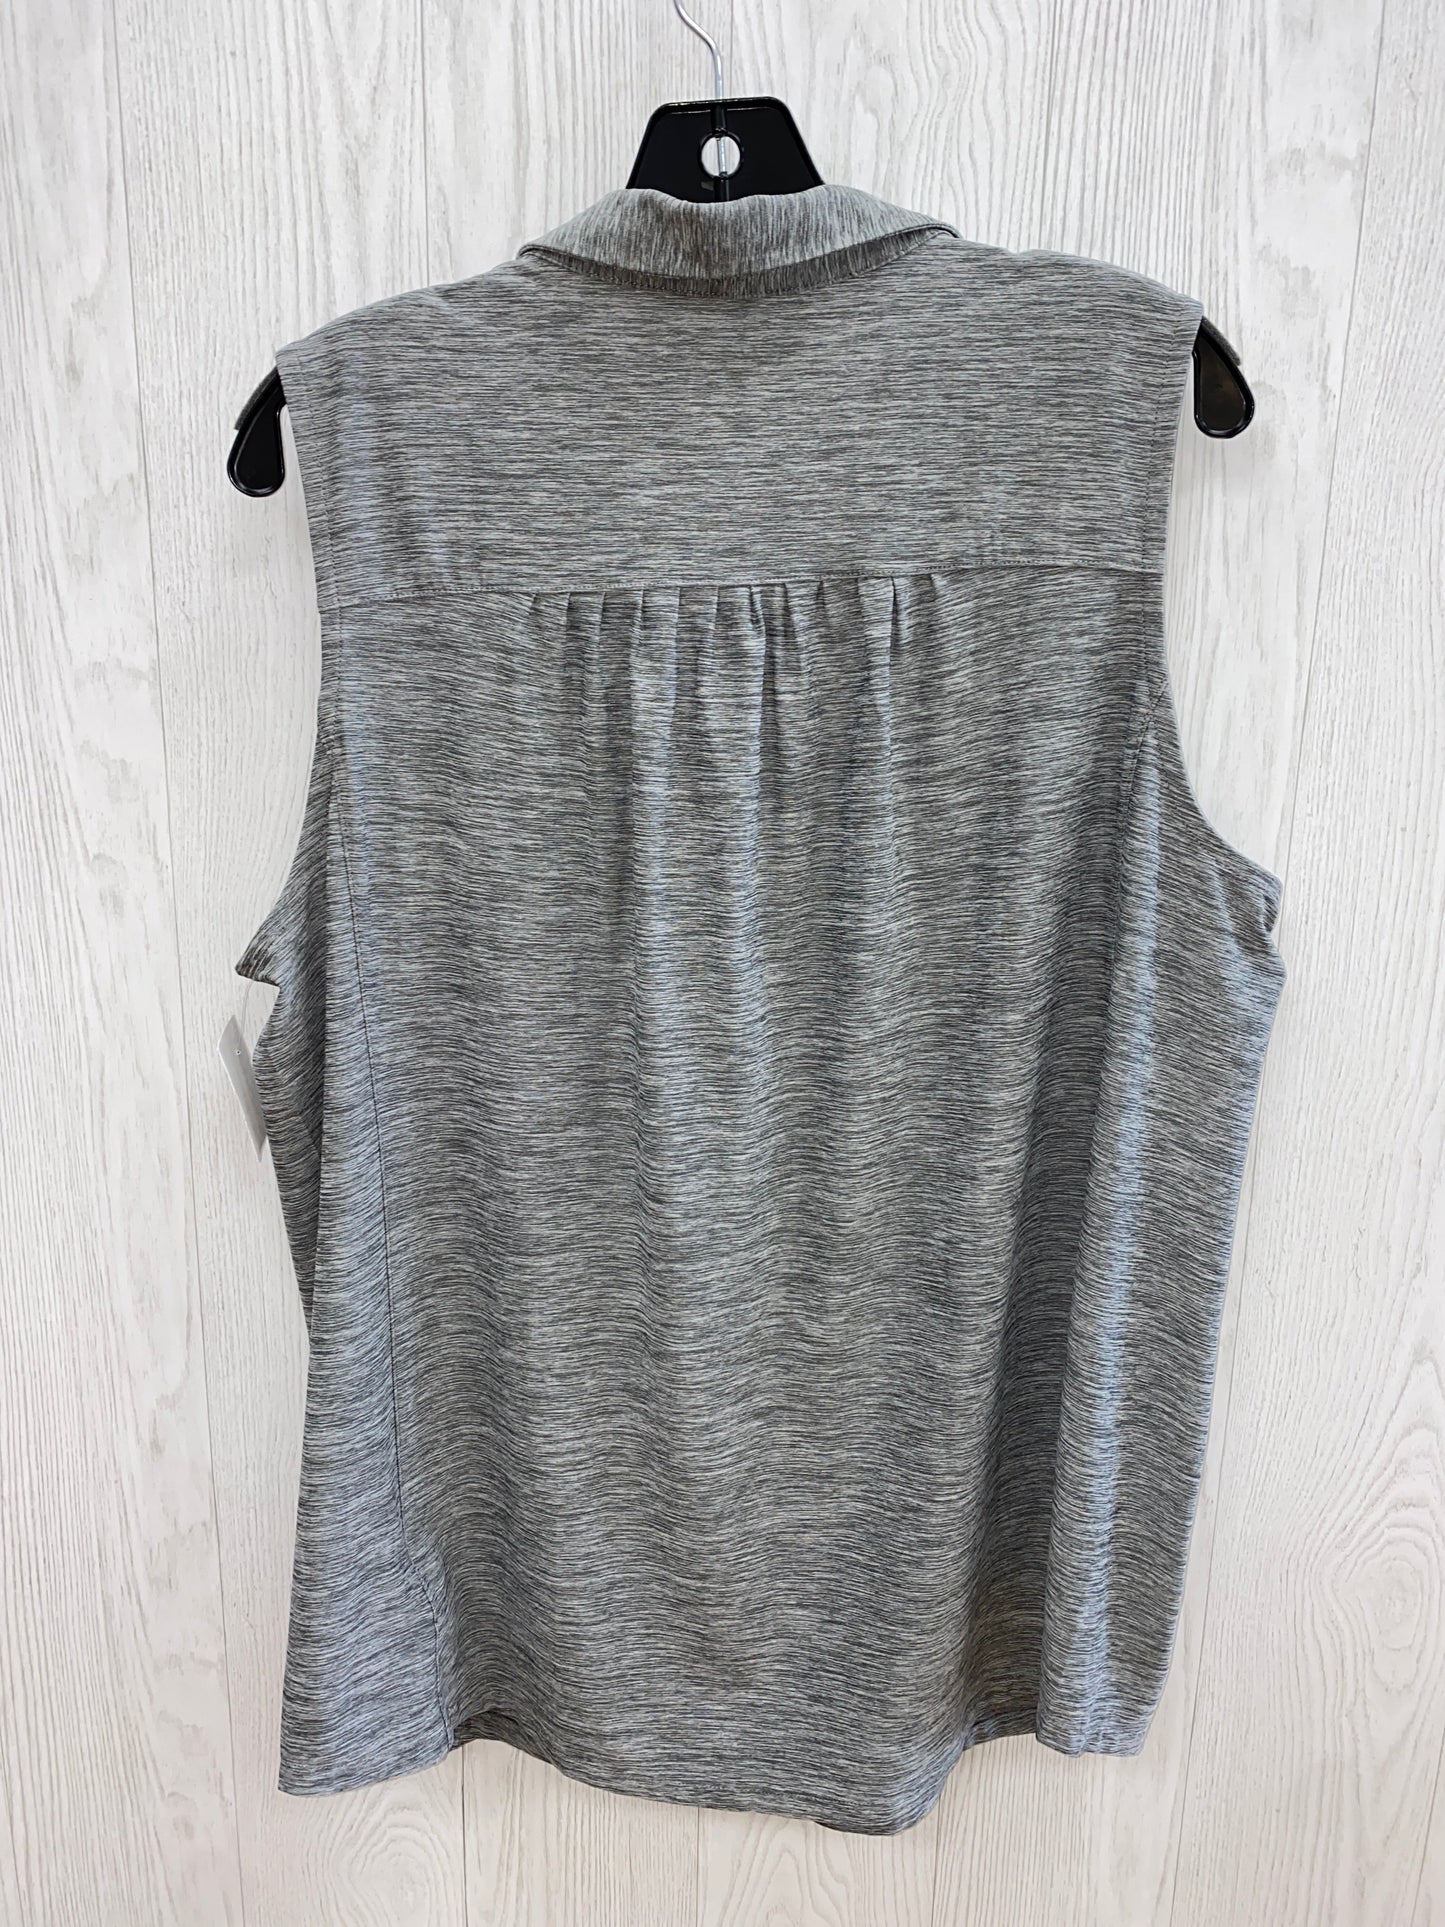 Athletic Tank Top By Duluth Trading  Size: Xl